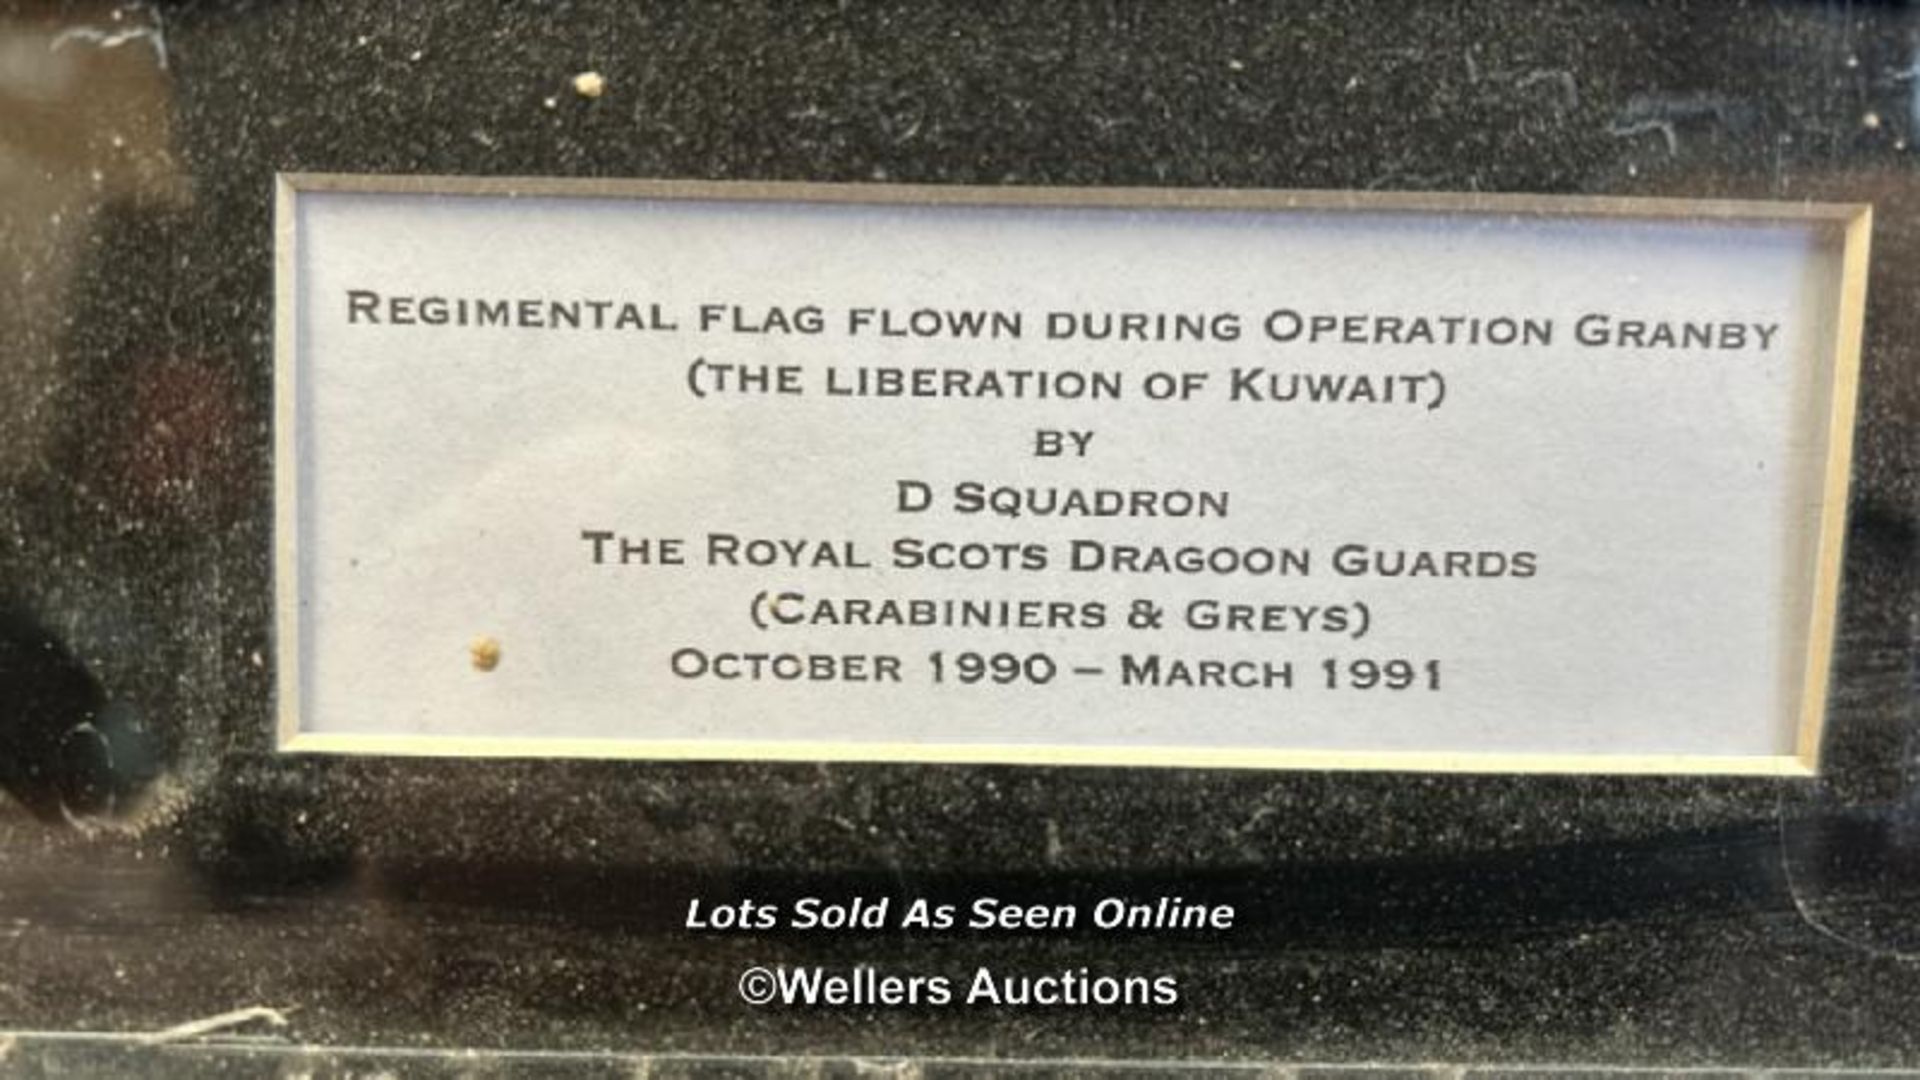 REGIMENTAL FLAG FLOWN DURING OPERATION GRANBY (THE LIBERATION OF KUWAIT) BY D SQUADRON, THE ROYAL - Bild 4 aus 7